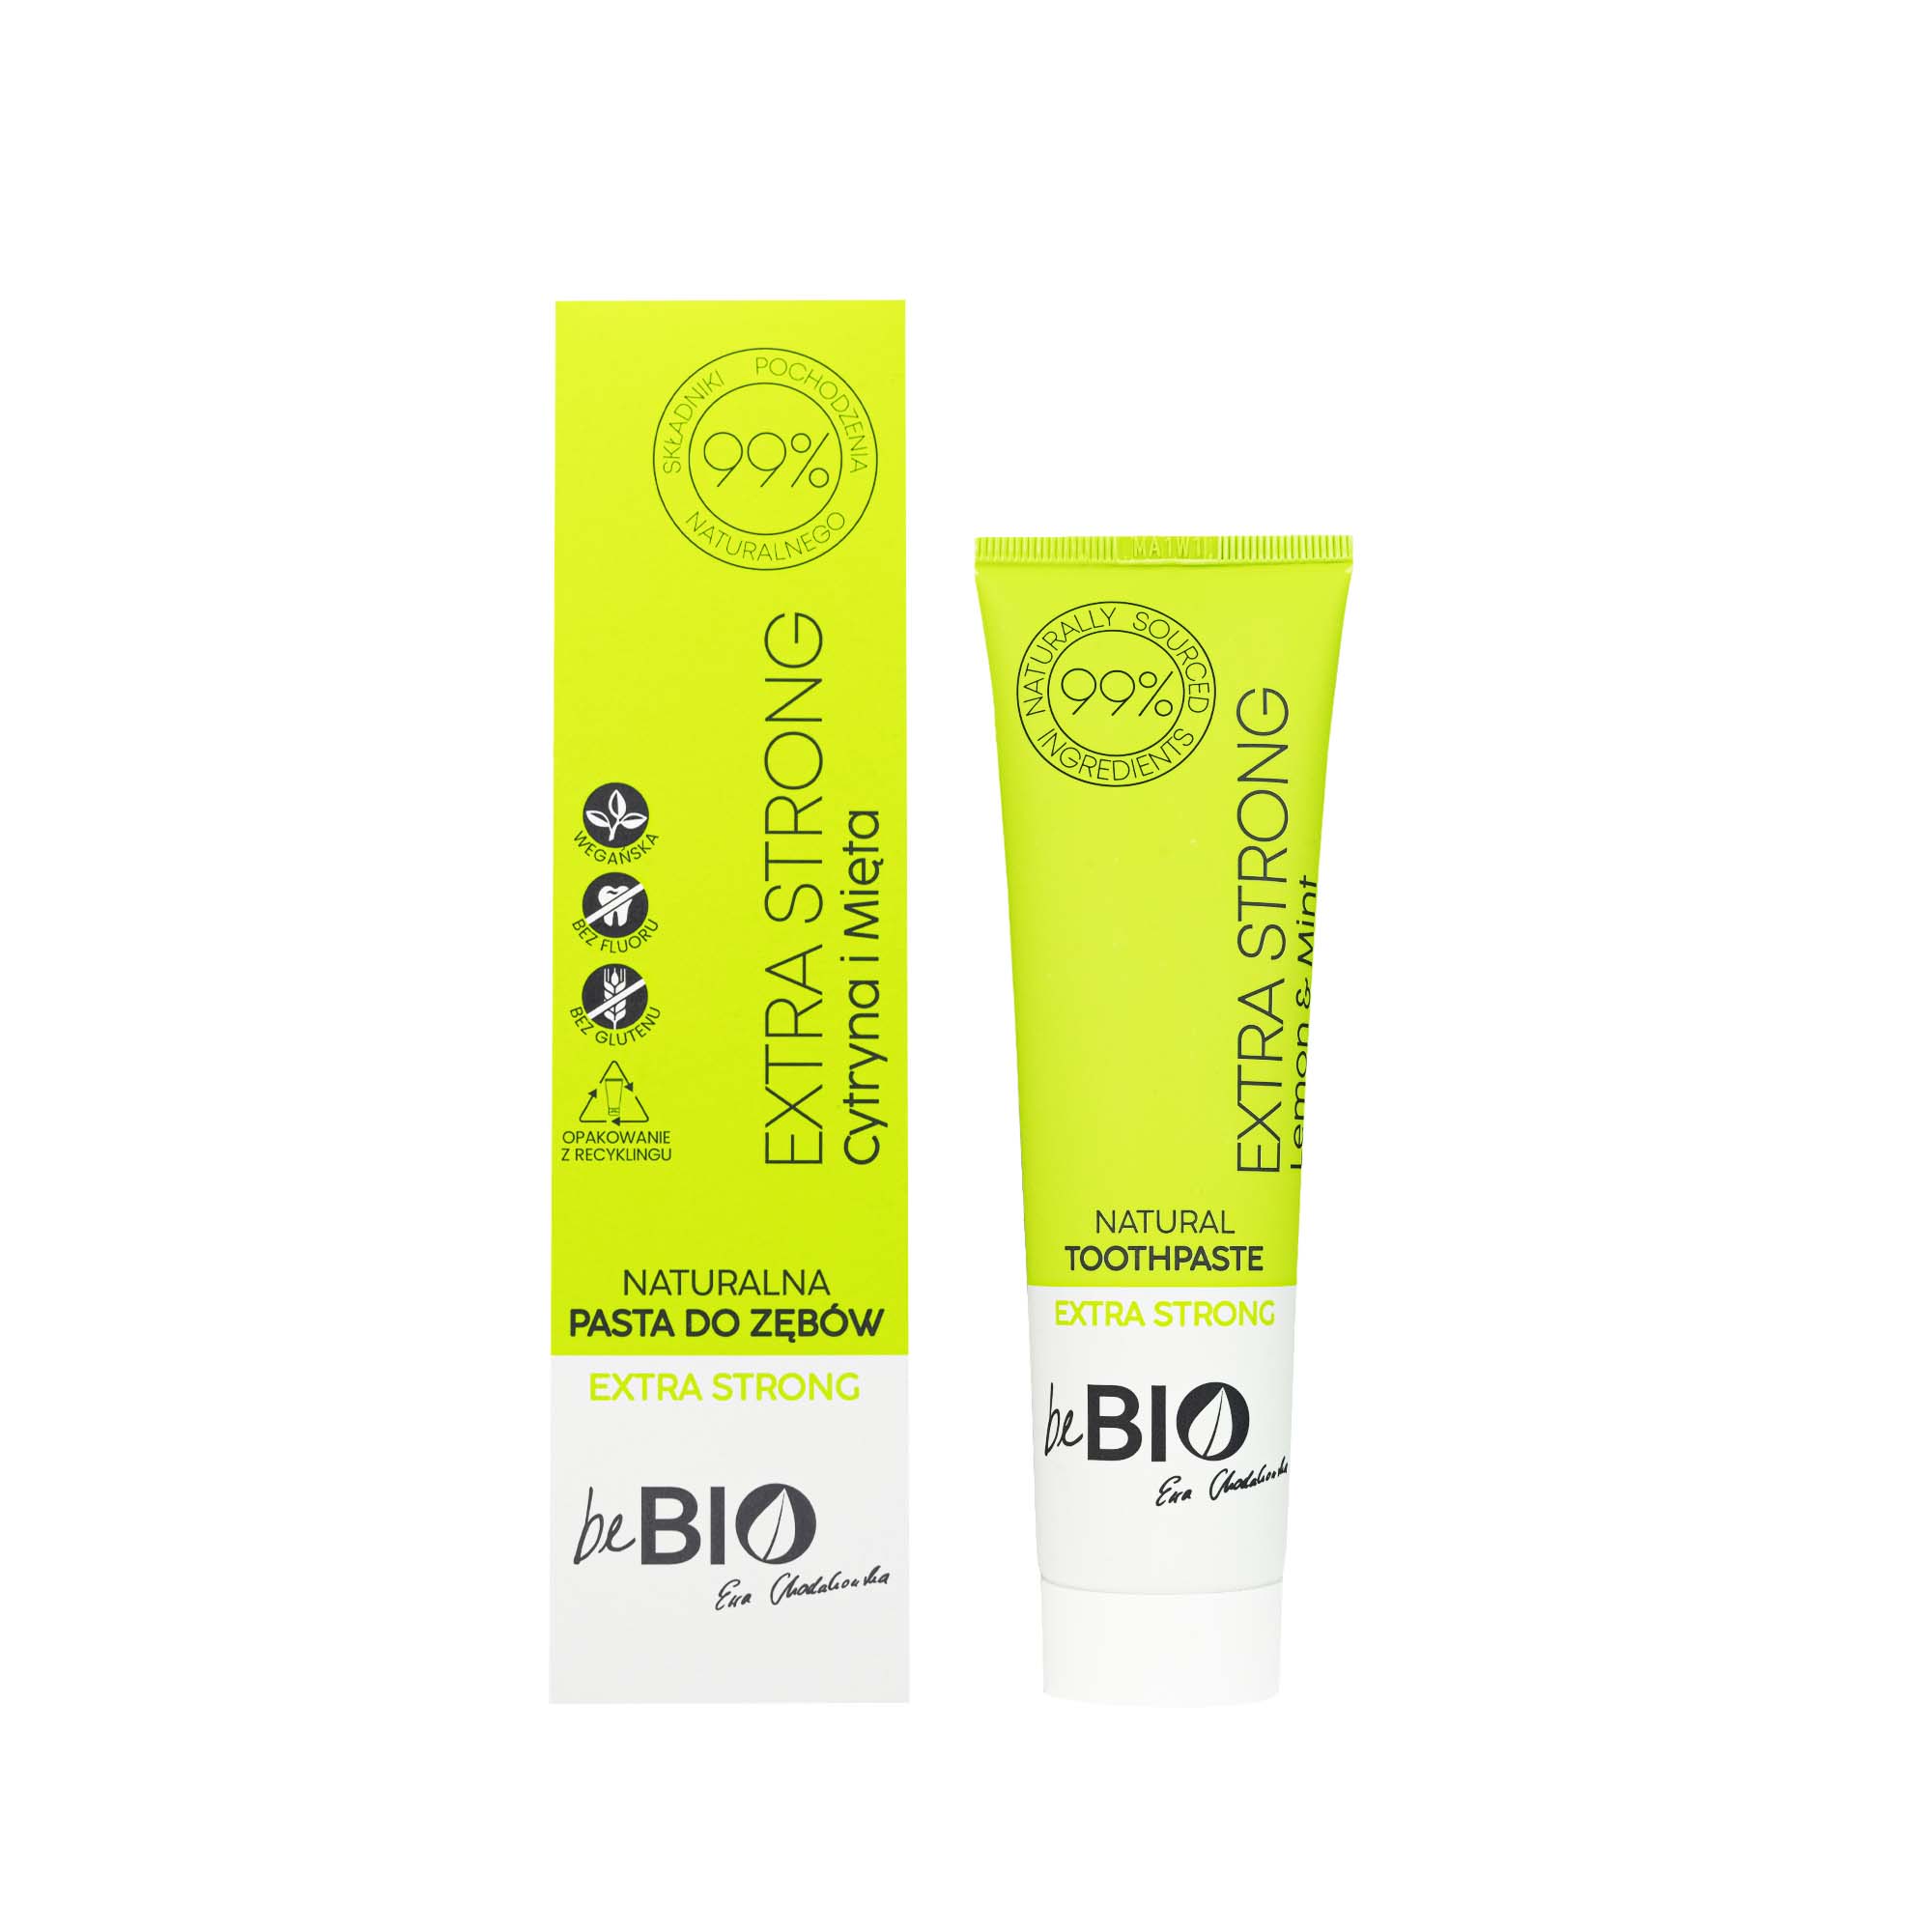 beBIO-Natural-toothpaste-EXTRA-STRONG-LemonMint-100ml